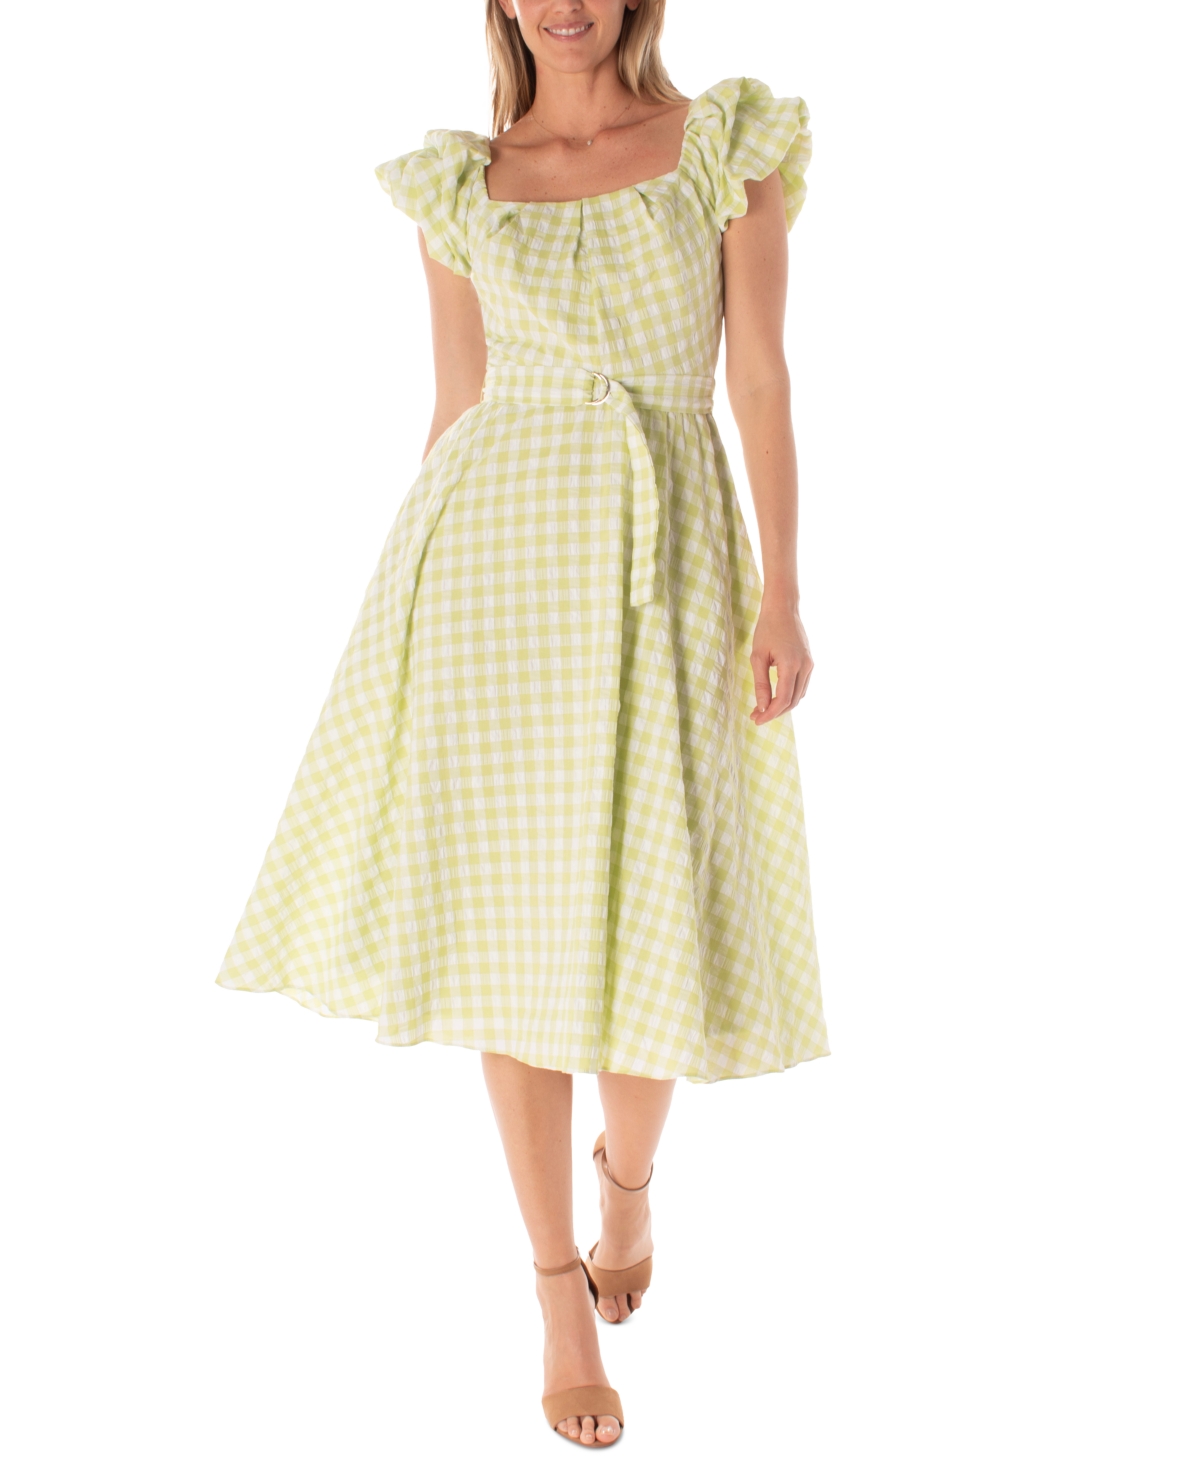 Women's Gingham Belted Fit & Flare Dress - Lime/Ivory